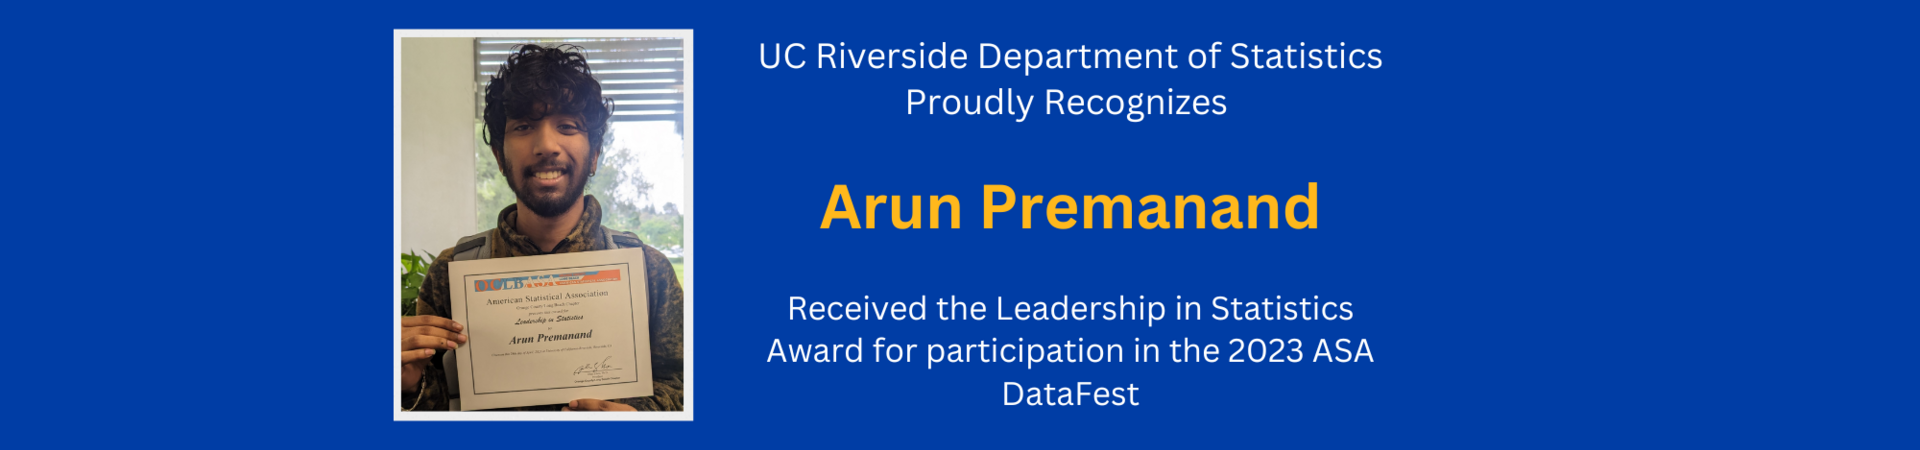 Arun Premanand received the leadership in statistics award